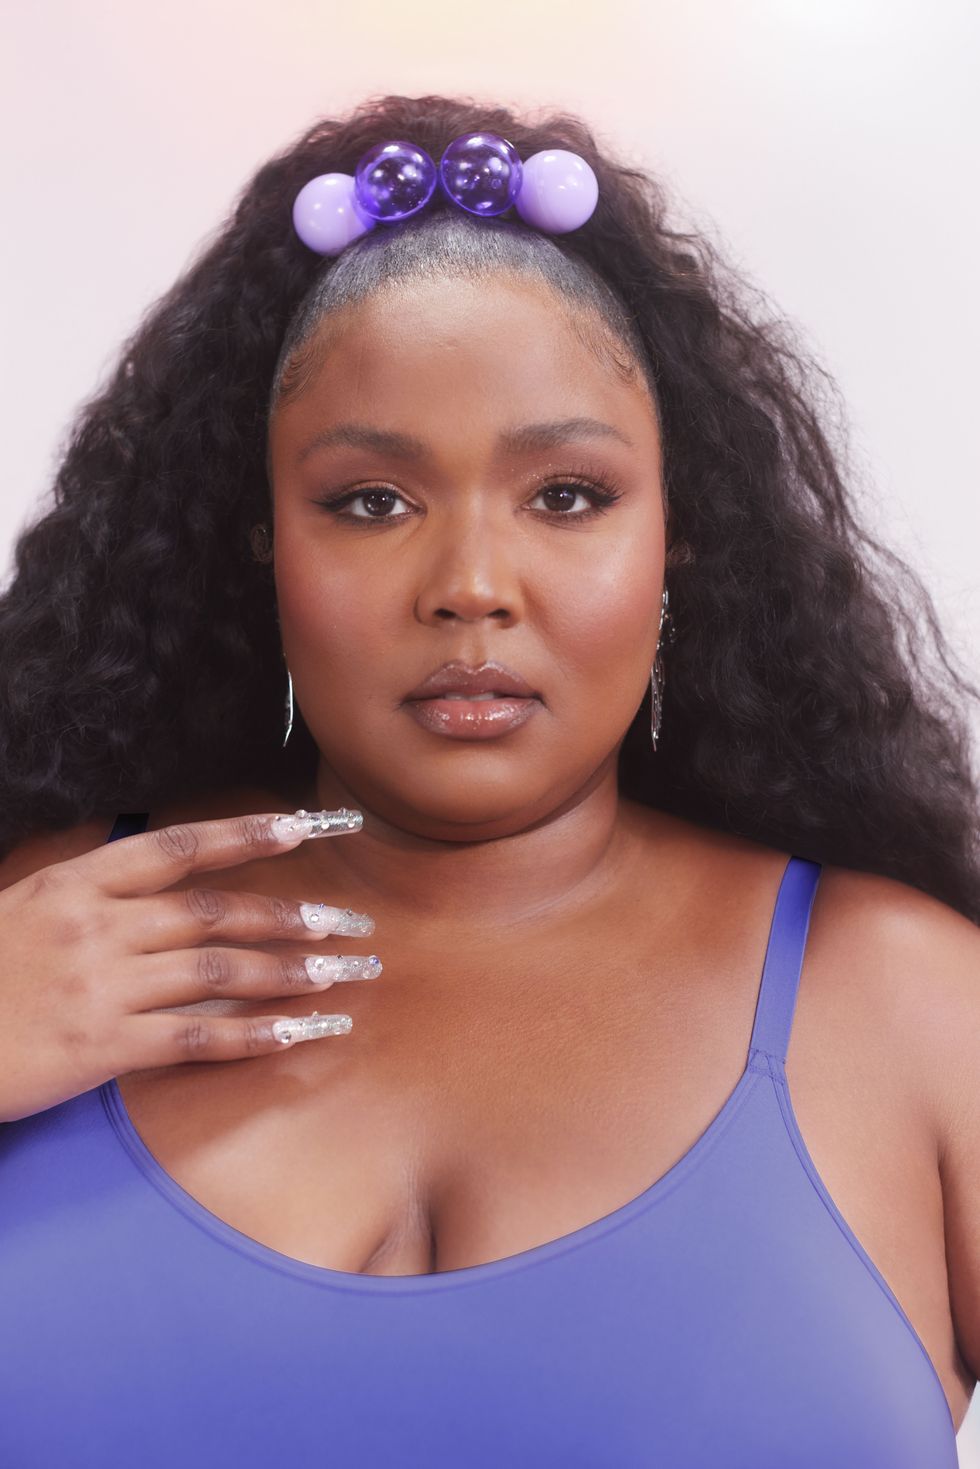 Lizzo's Yitty shapewear vs Universal Standard - Apparently this